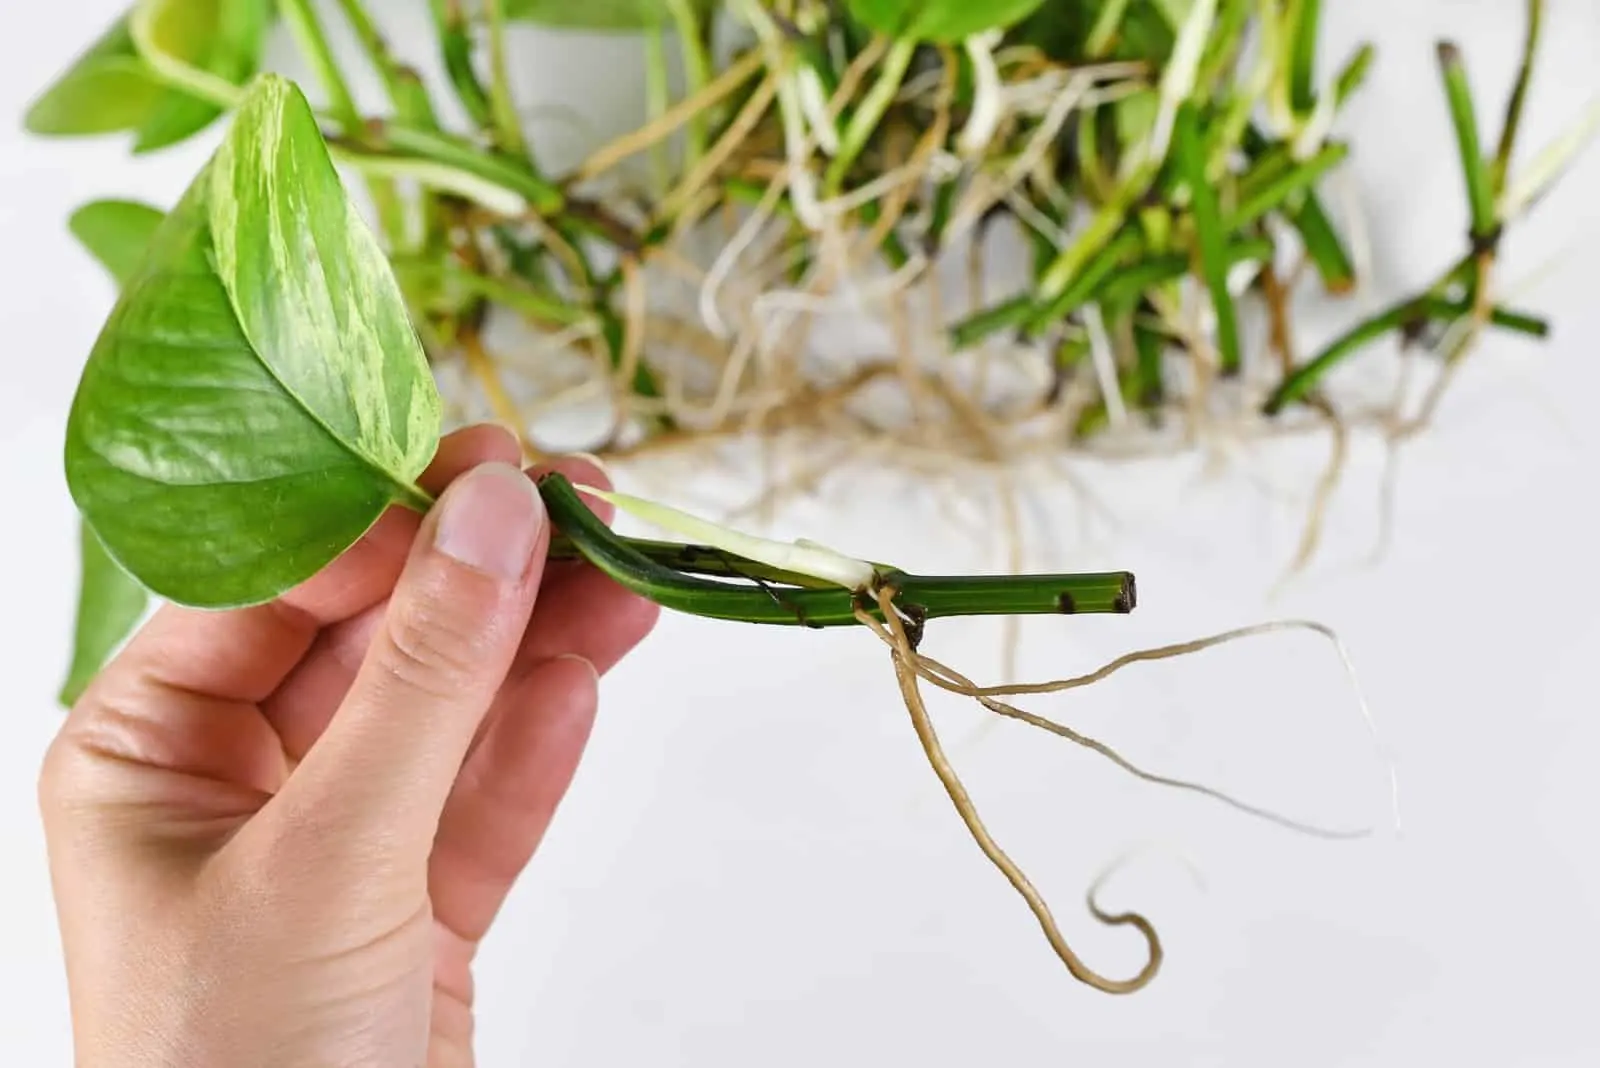 hand holding pothos with root